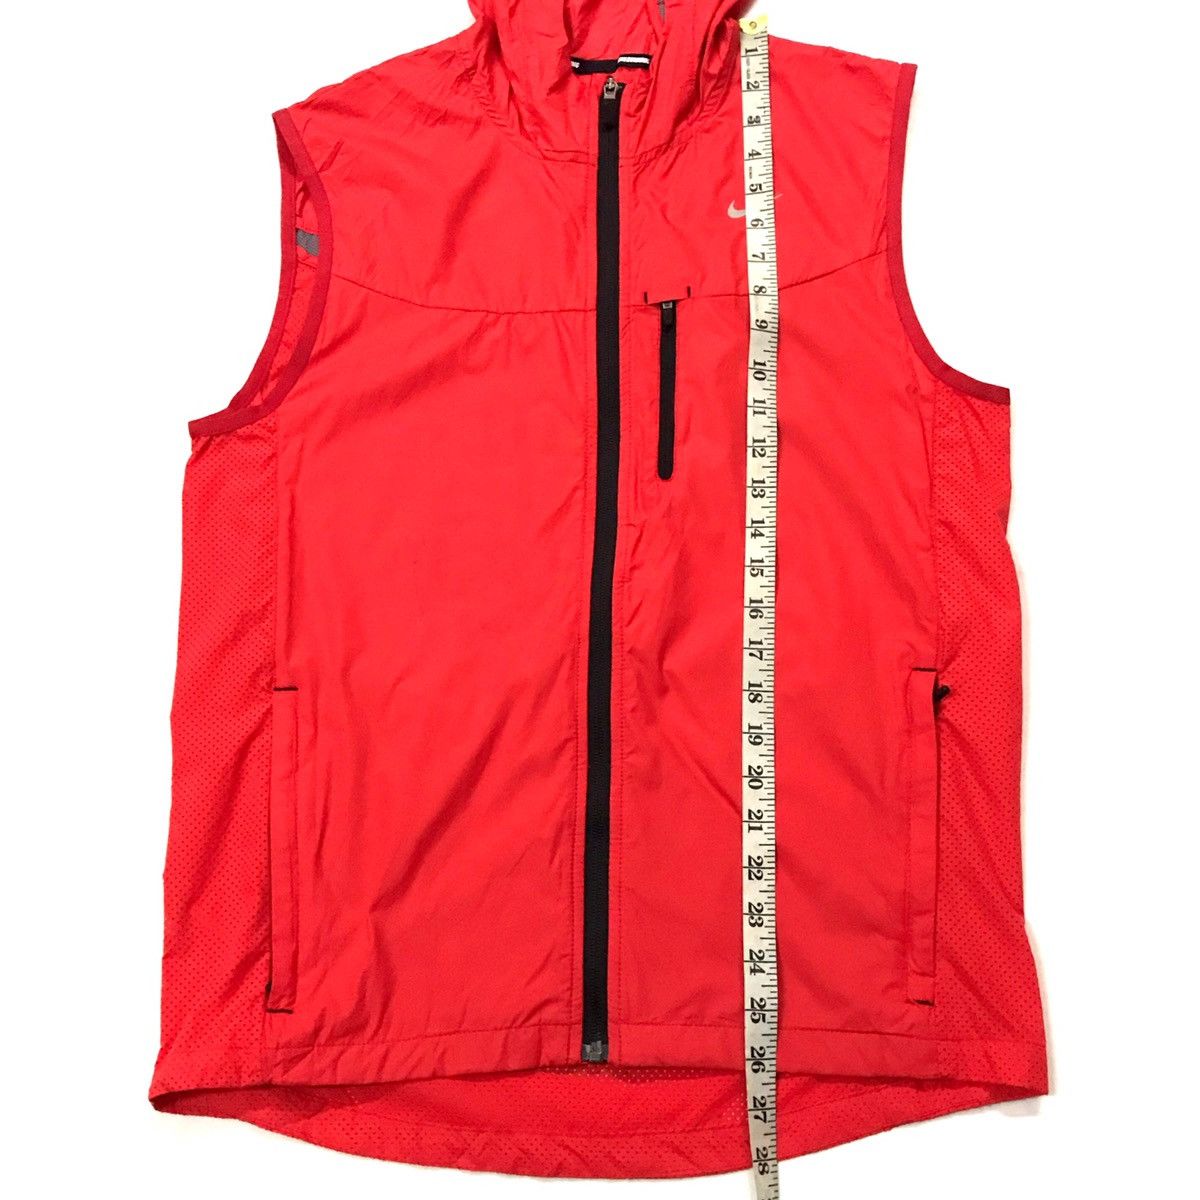 Nike Nike running vest hoodie Size US M / EU 48-50 / 2 - 10 Preview